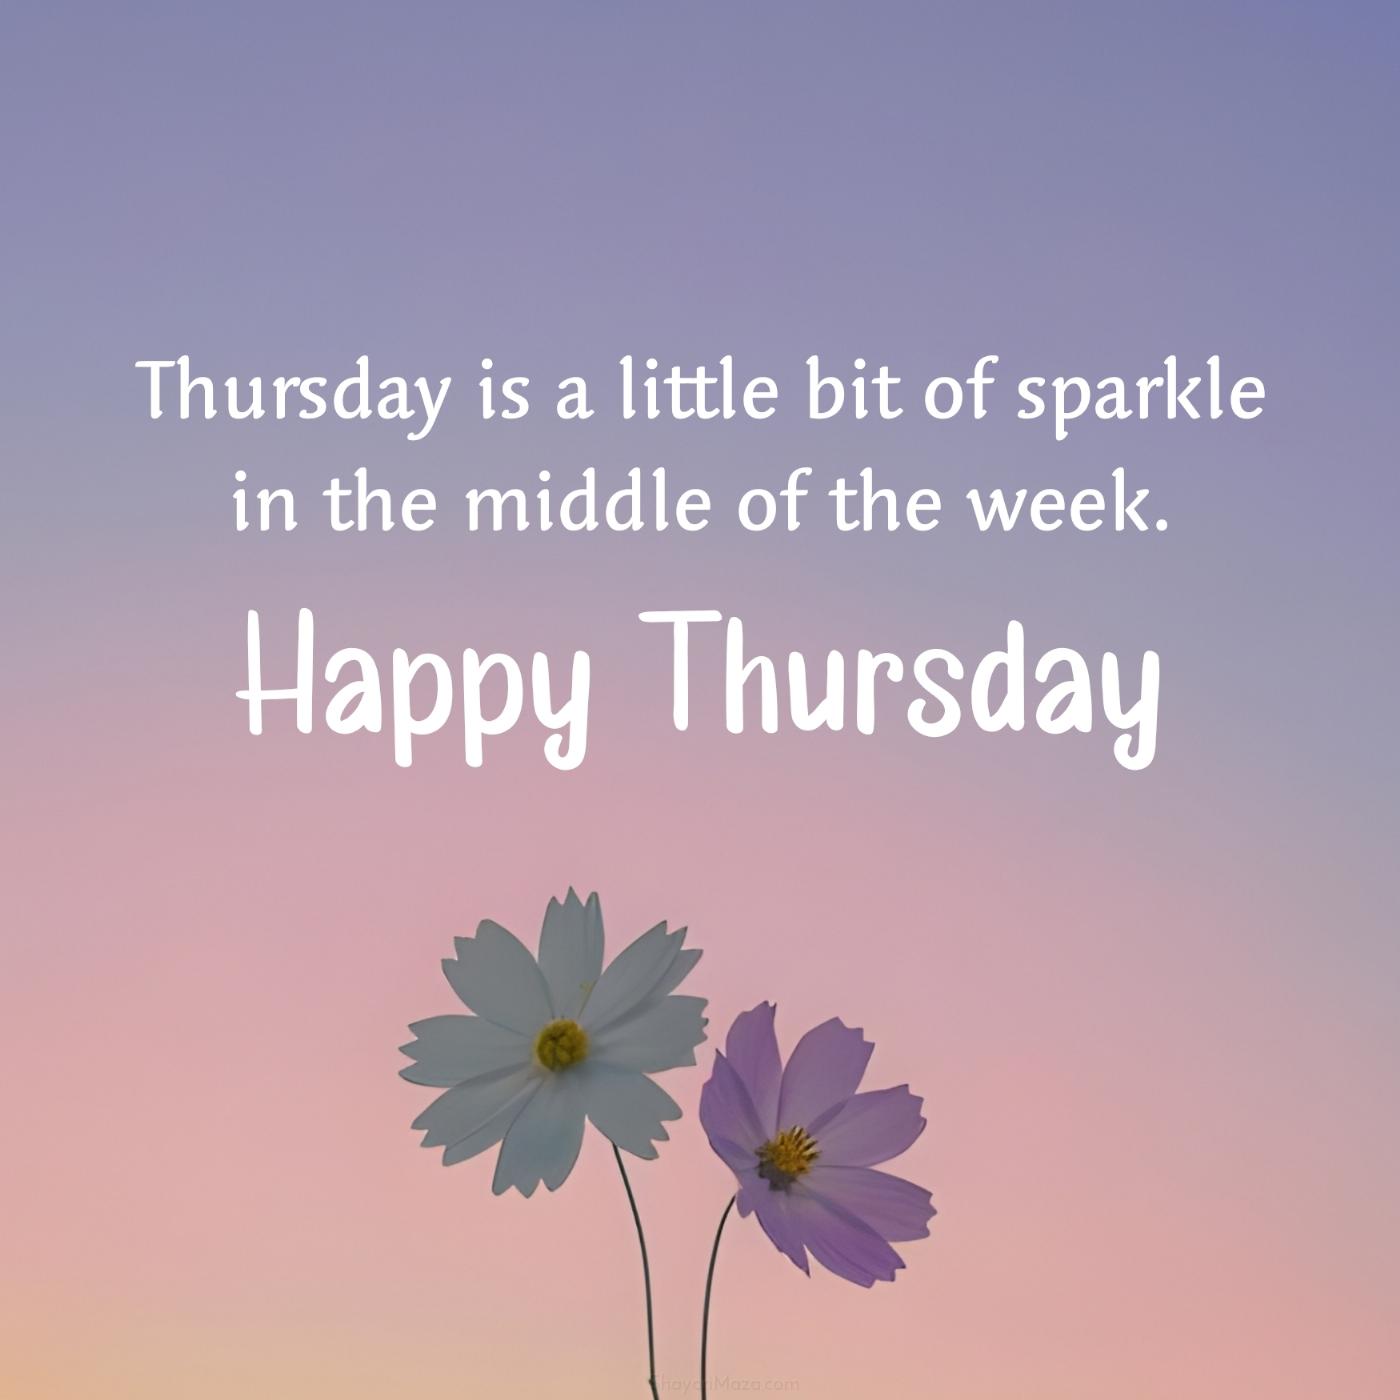 Thursday is a little bit of sparkle in the middle of the week